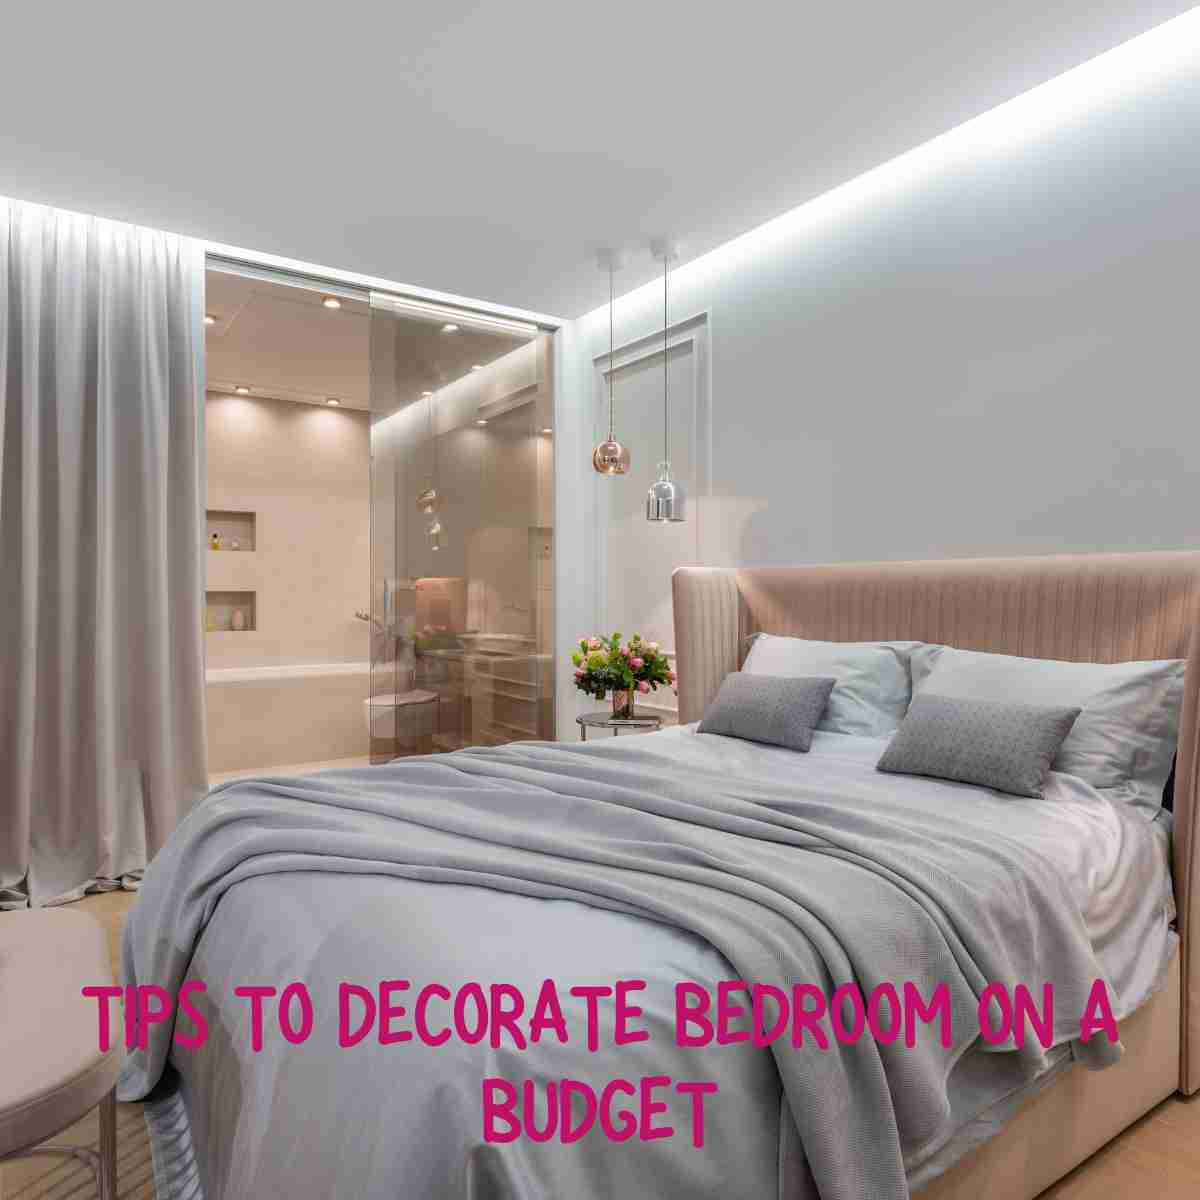 Tips to Decorate Bedroom On A Budget